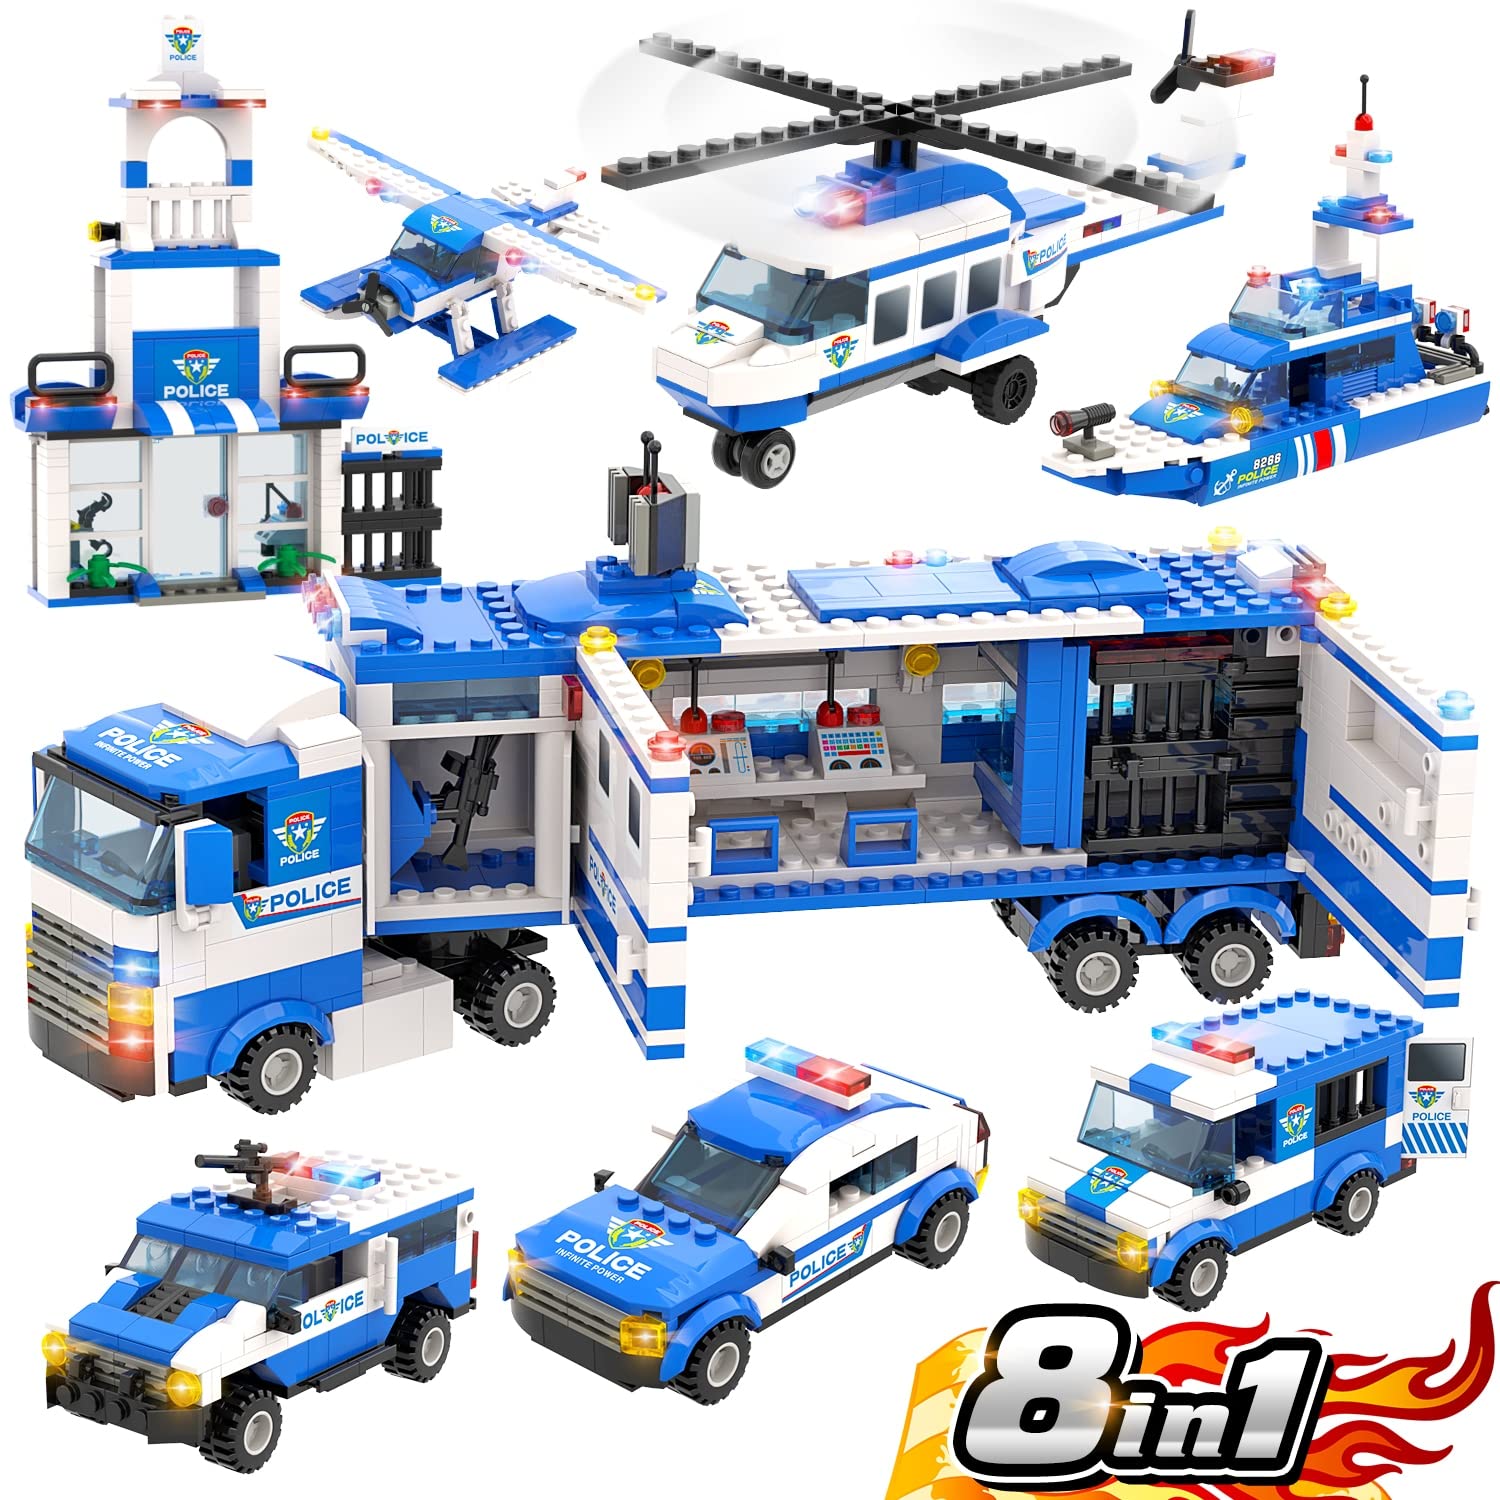 1039 Pieces City Police Station Building Set, 8 in 1 Mobile Command Center Building Toy with Cop Car, Helicopter, Boat, Best Learning Roleplay STEM Toy Gifts for Boys and Girls Age 6-12